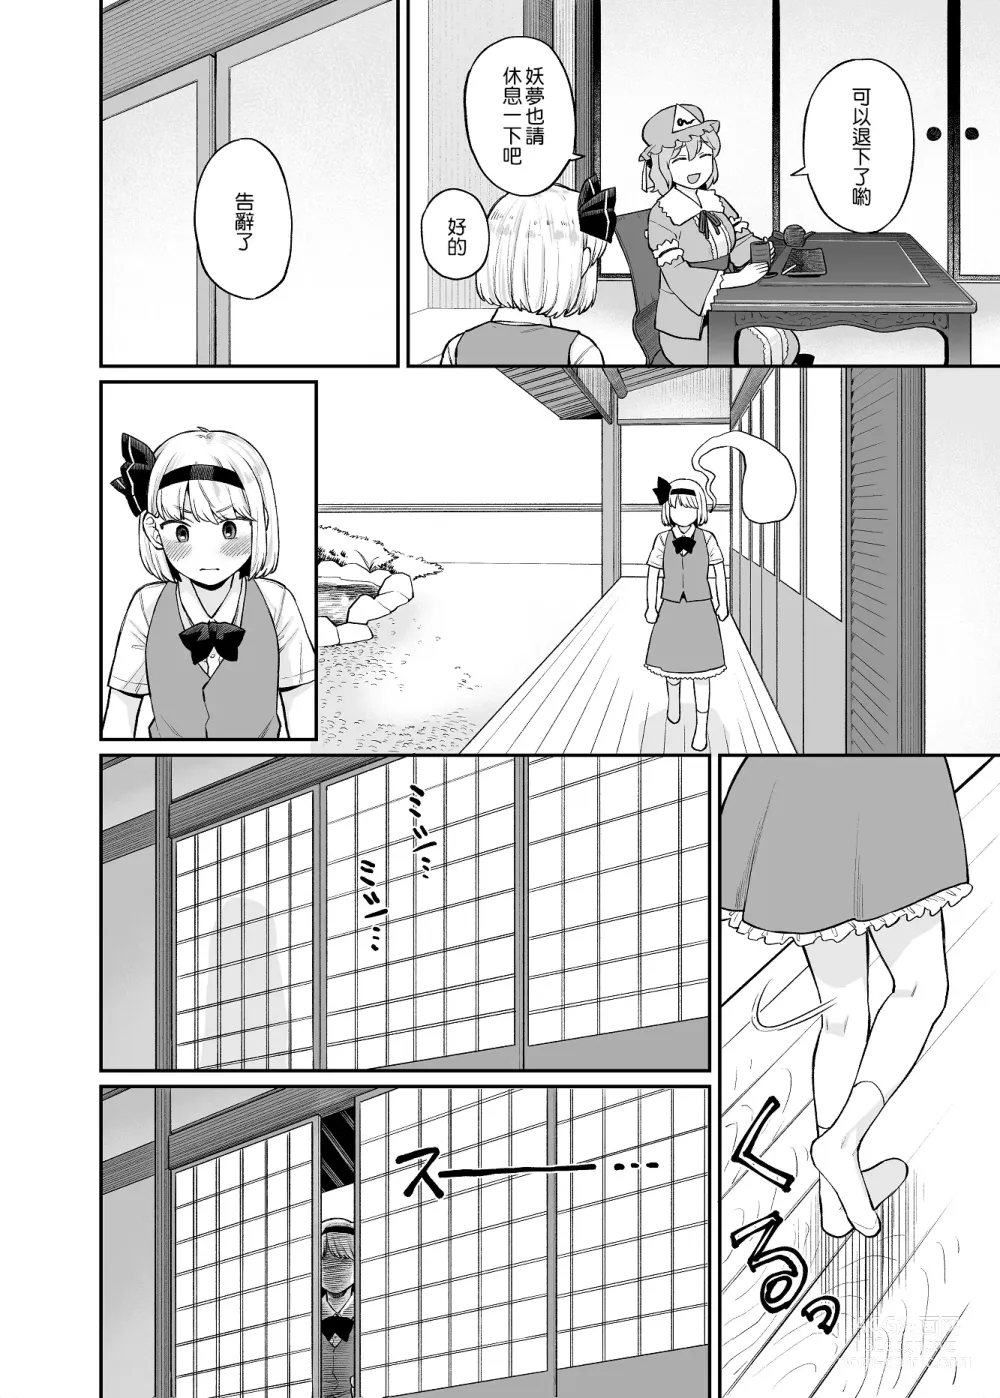 Page 6 of doujinshi 乌冬铃仙系列第2话